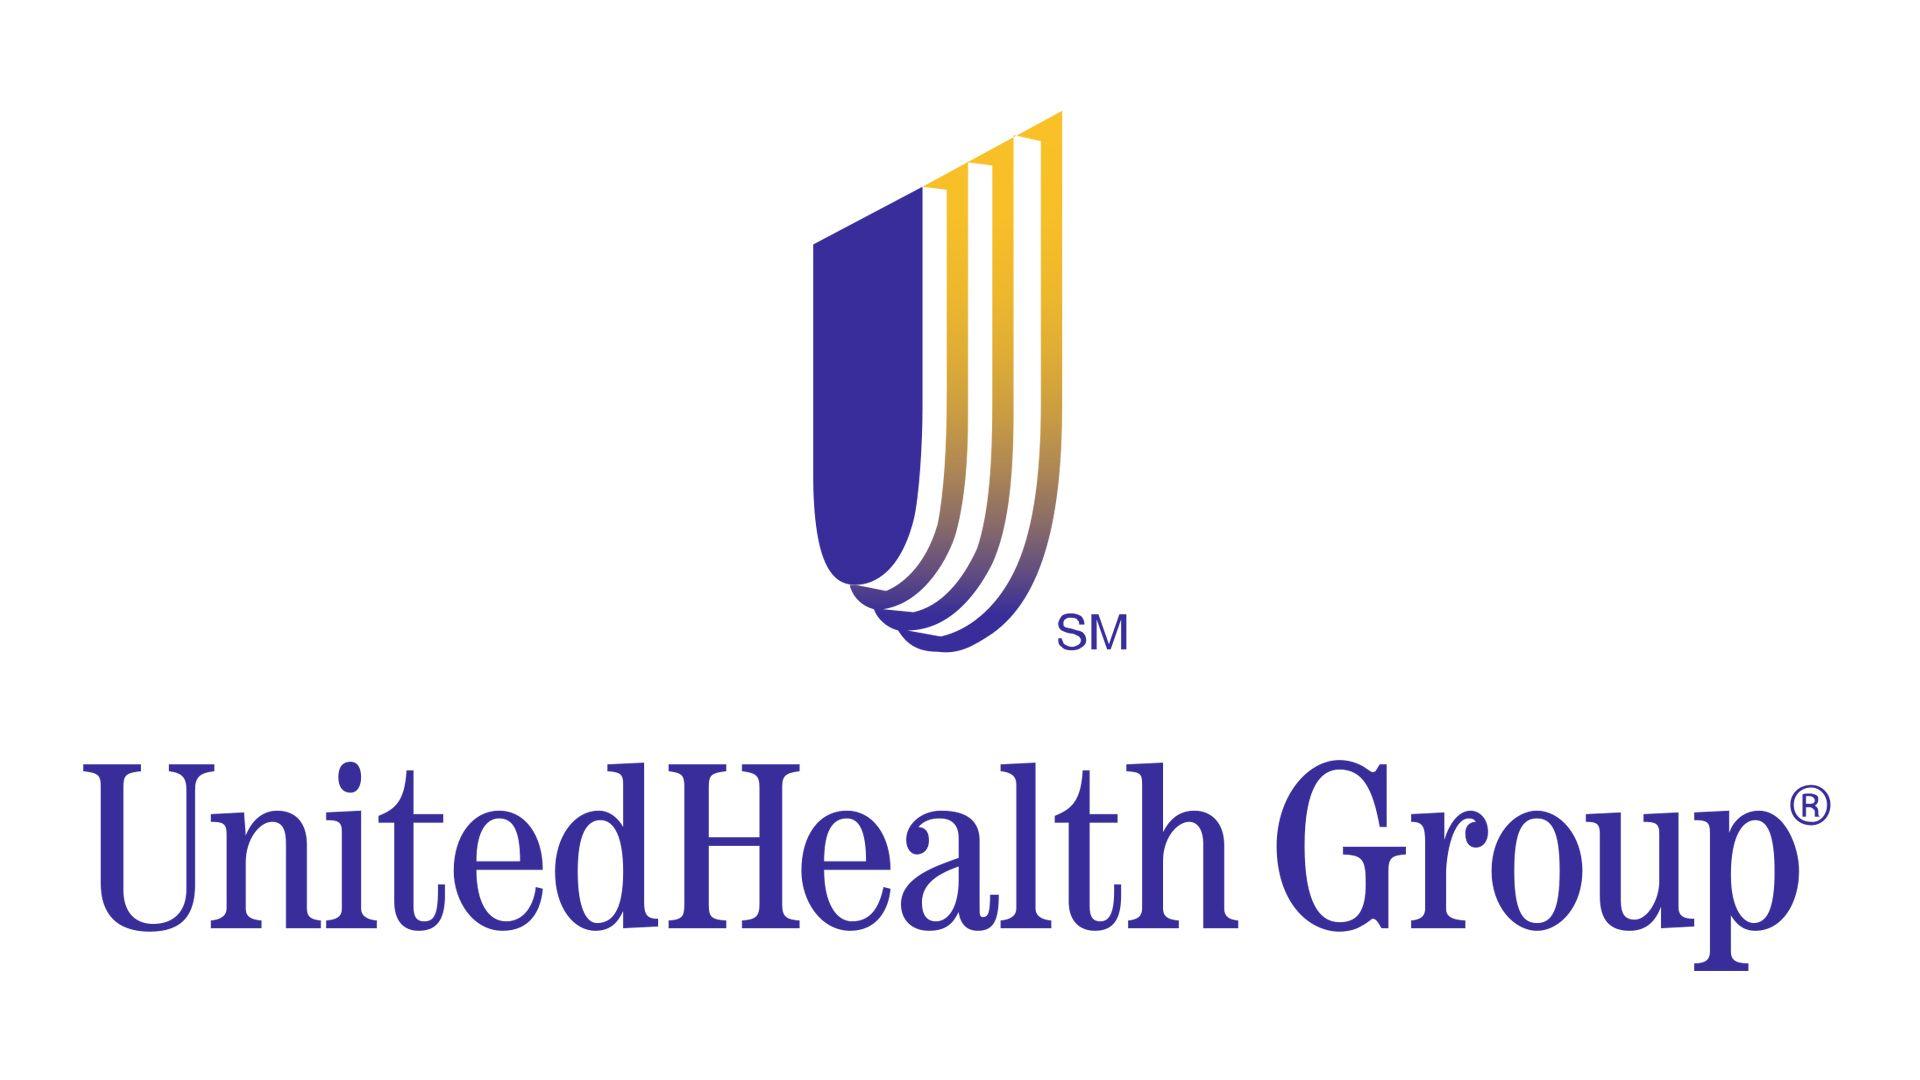 Health Care Logo - United Healthcare Logo, United Healthcare Symbol, Meaning, History ...